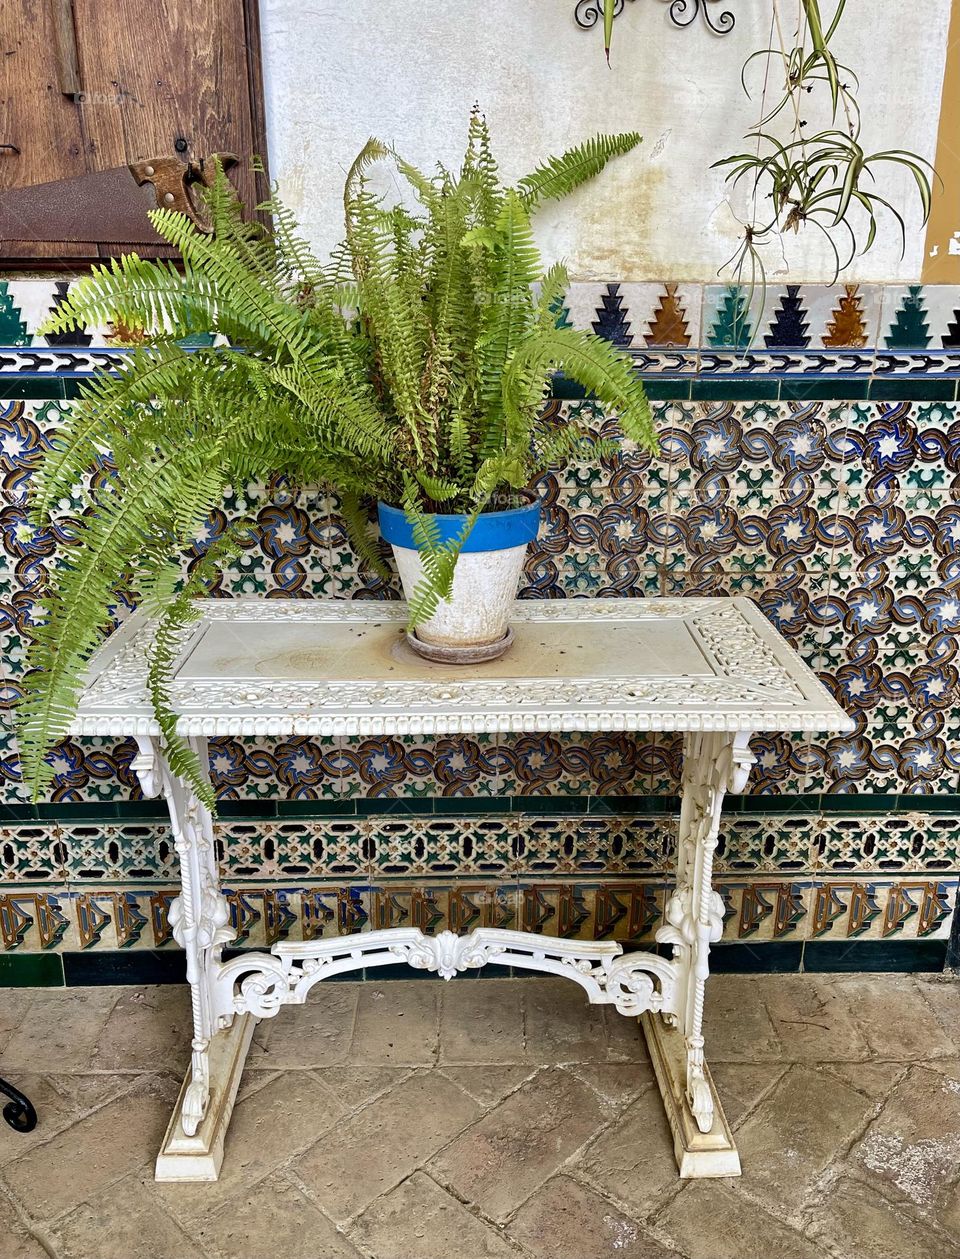 fern plant inside a terracotta pot on top of a metal garden table with a background of hand painted ceramic tiles